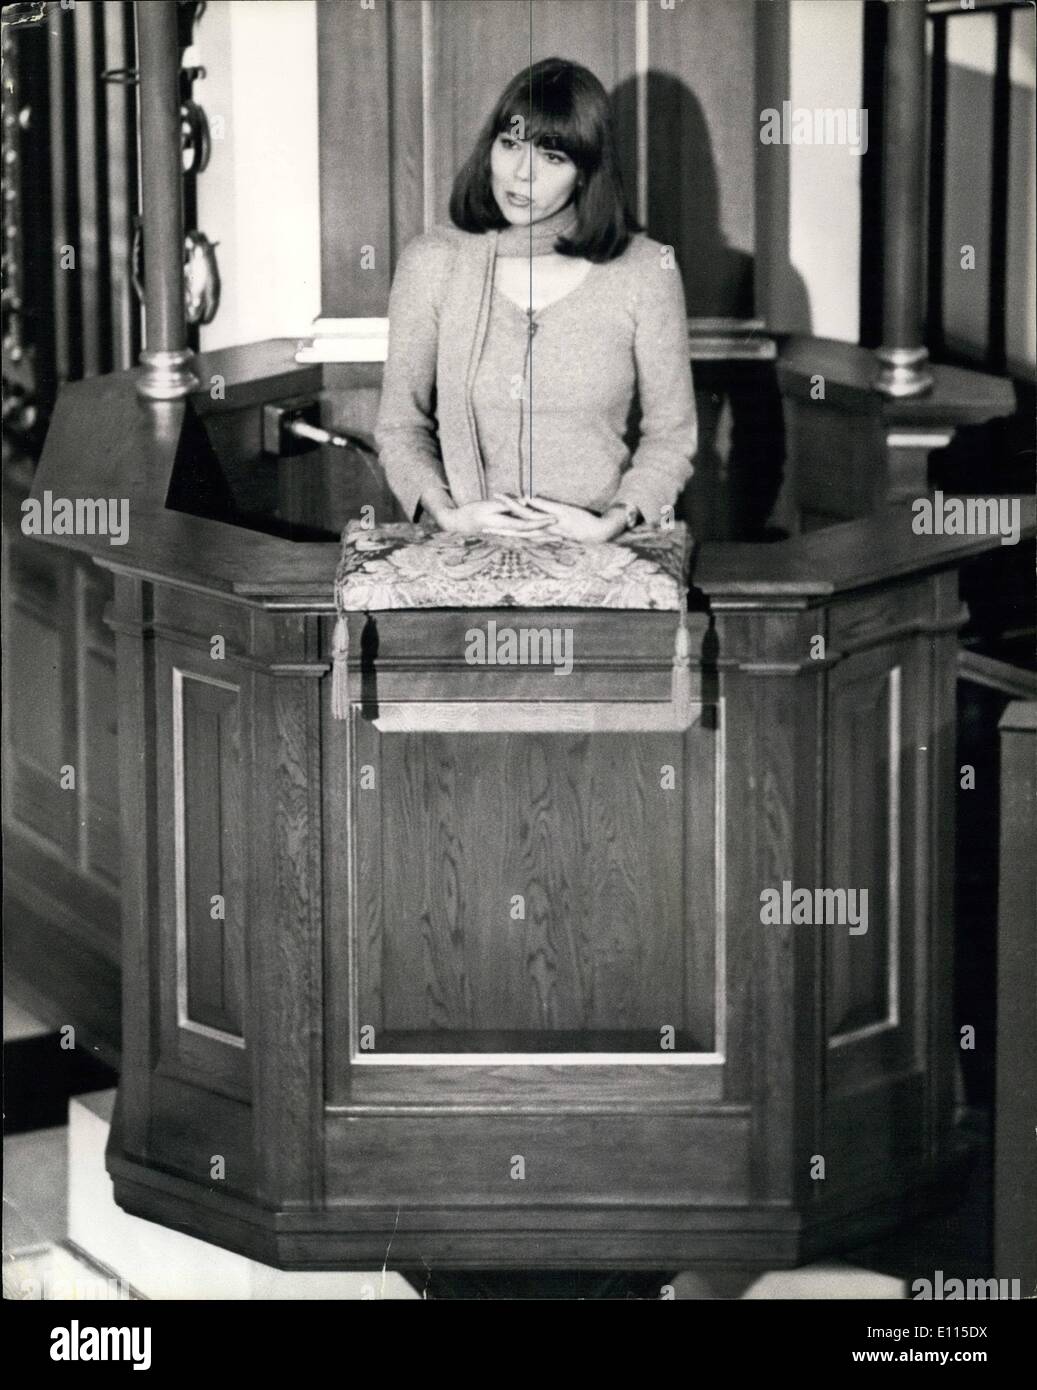 Jan. 01, 1976 - Actress Diana Rigg in the Pulpit: Actress Dianna Rigg who starred with Patrick McNee in the television series The Avengers, looks as though she is likely to have to appear in the Divorce court, because of her love affair with Archie Sterling, husband of Charmain Stirling, niee of Princess Alice, Duchess of Gloucester, The Stirling's wedding in 1964 was one of the smartest, attended by the Queen and other members of the Royal Family. Photo shows Actress Diana Rigg speaking from the pulpit of St Stock Photo